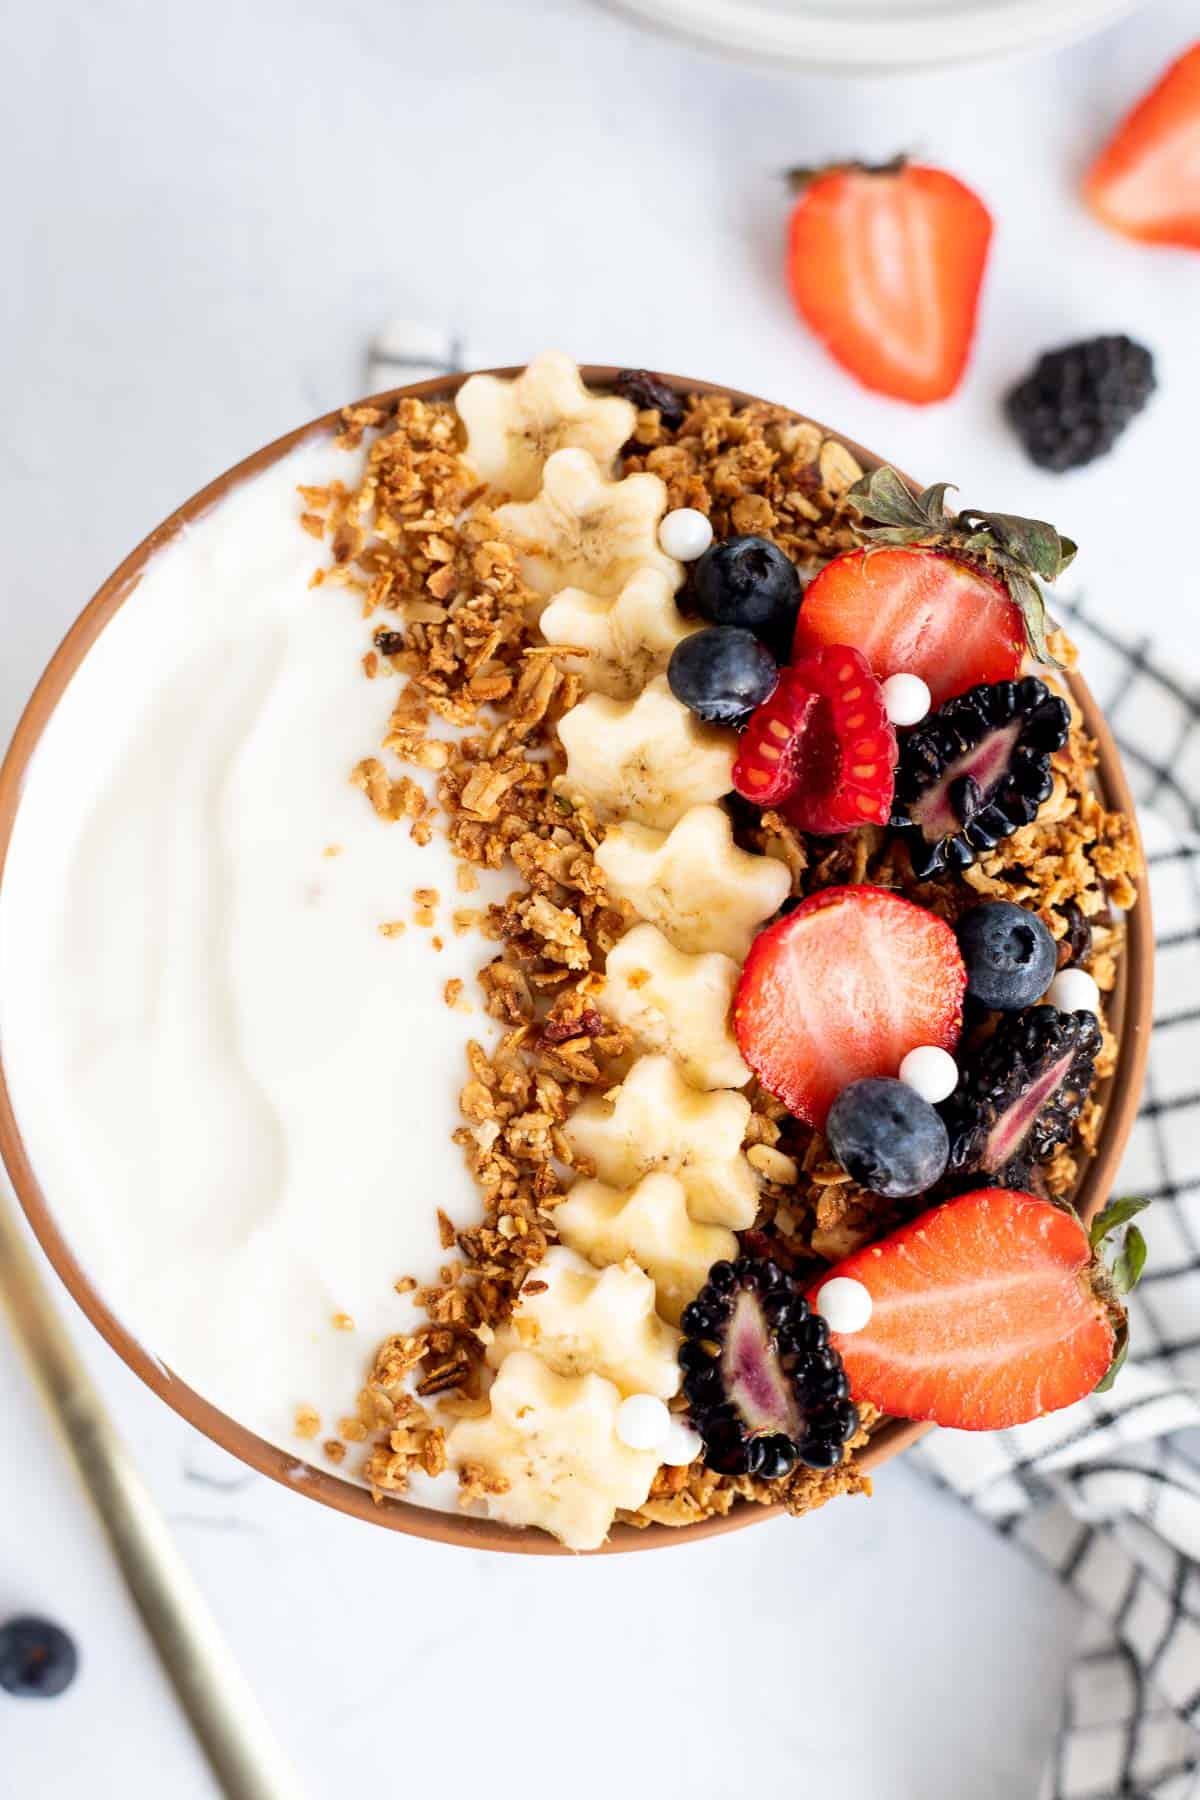 yogurt and granola bowl topped with assorted berries and banana slices.